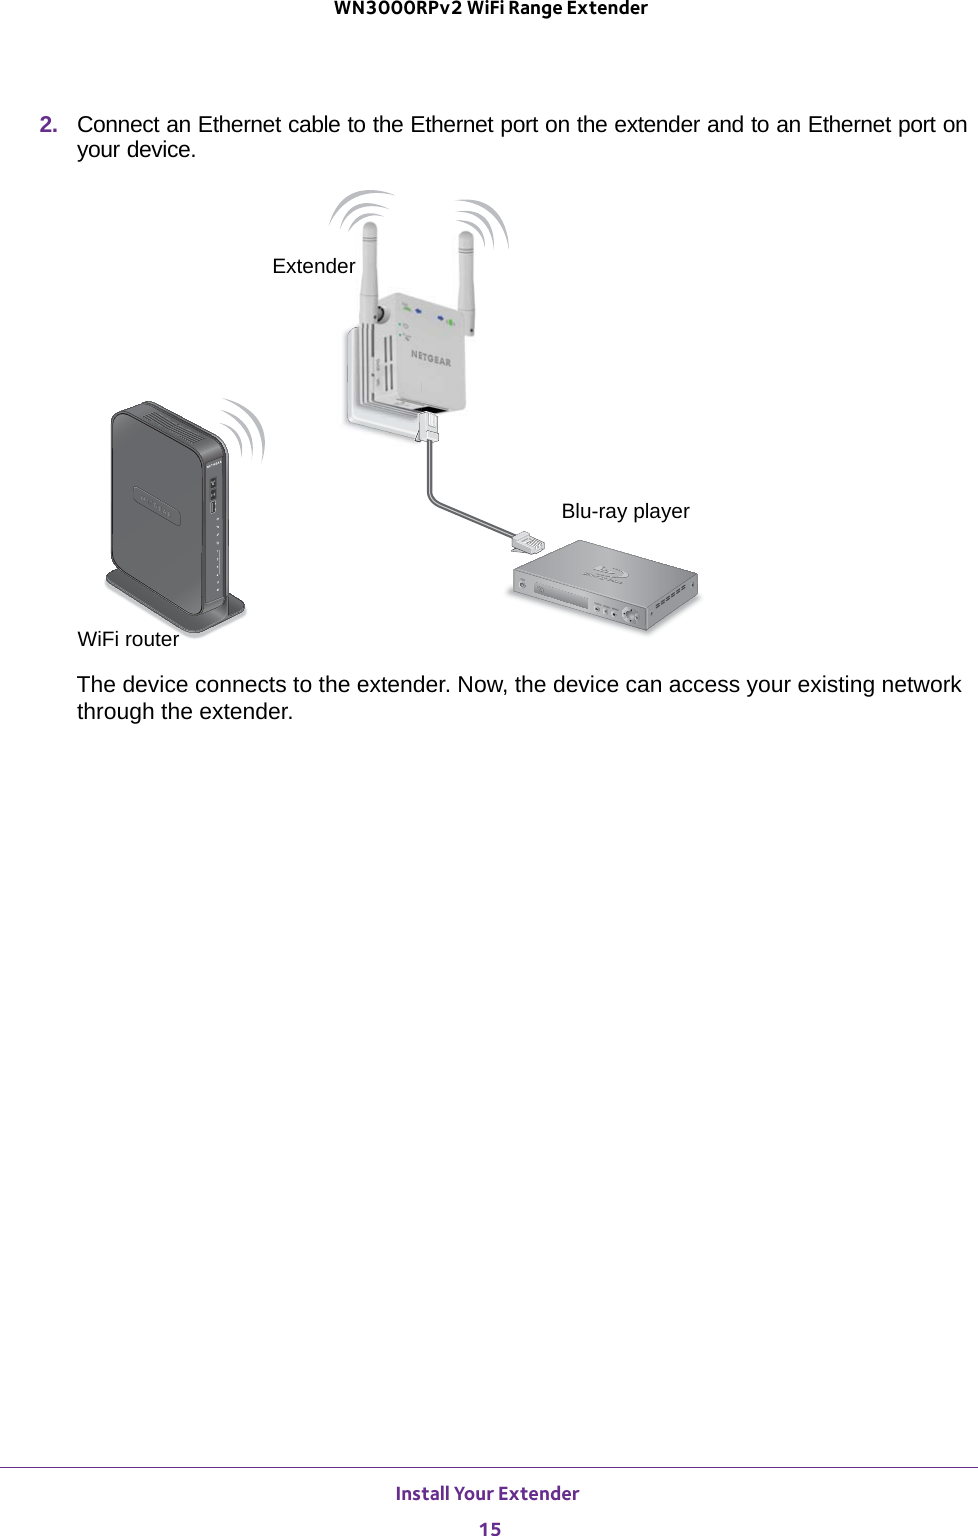 Install Your Extender 15 WN3000RPv2 WiFi Range Extender2.  Connect an Ethernet cable to the Ethernet port on the extender and to an Ethernet port on your device. WiFi routerExtenderBlu-ray playerThe device connects to the extender. Now, the device can access your existing network through the extender.